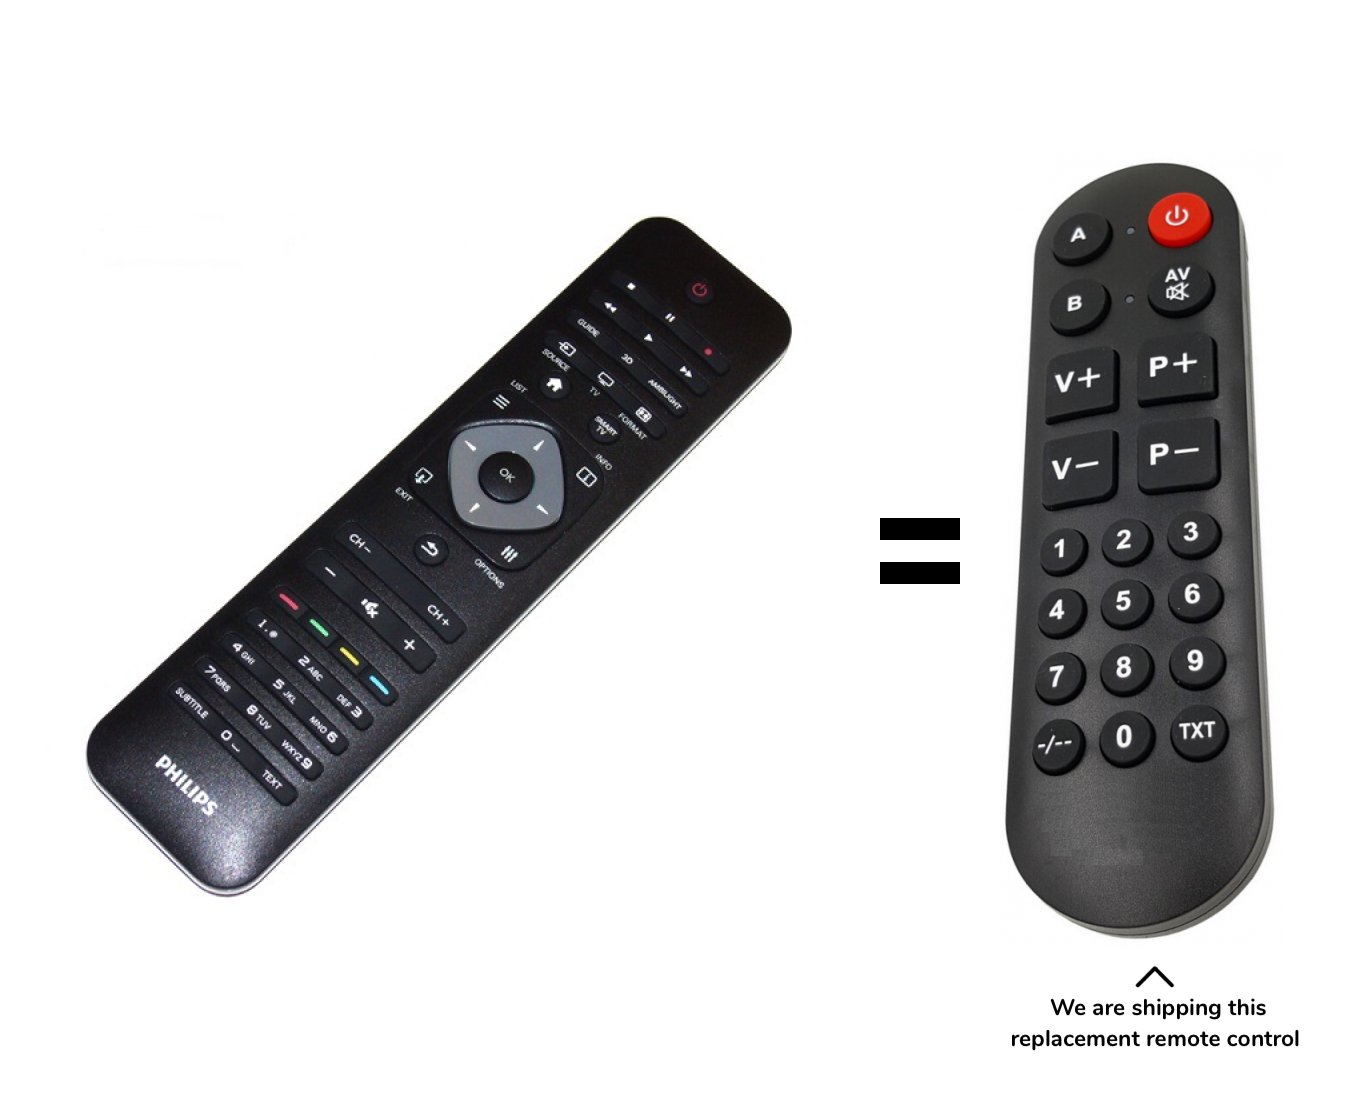 Philips YKF319-001 remote control for seniors with out keyboard